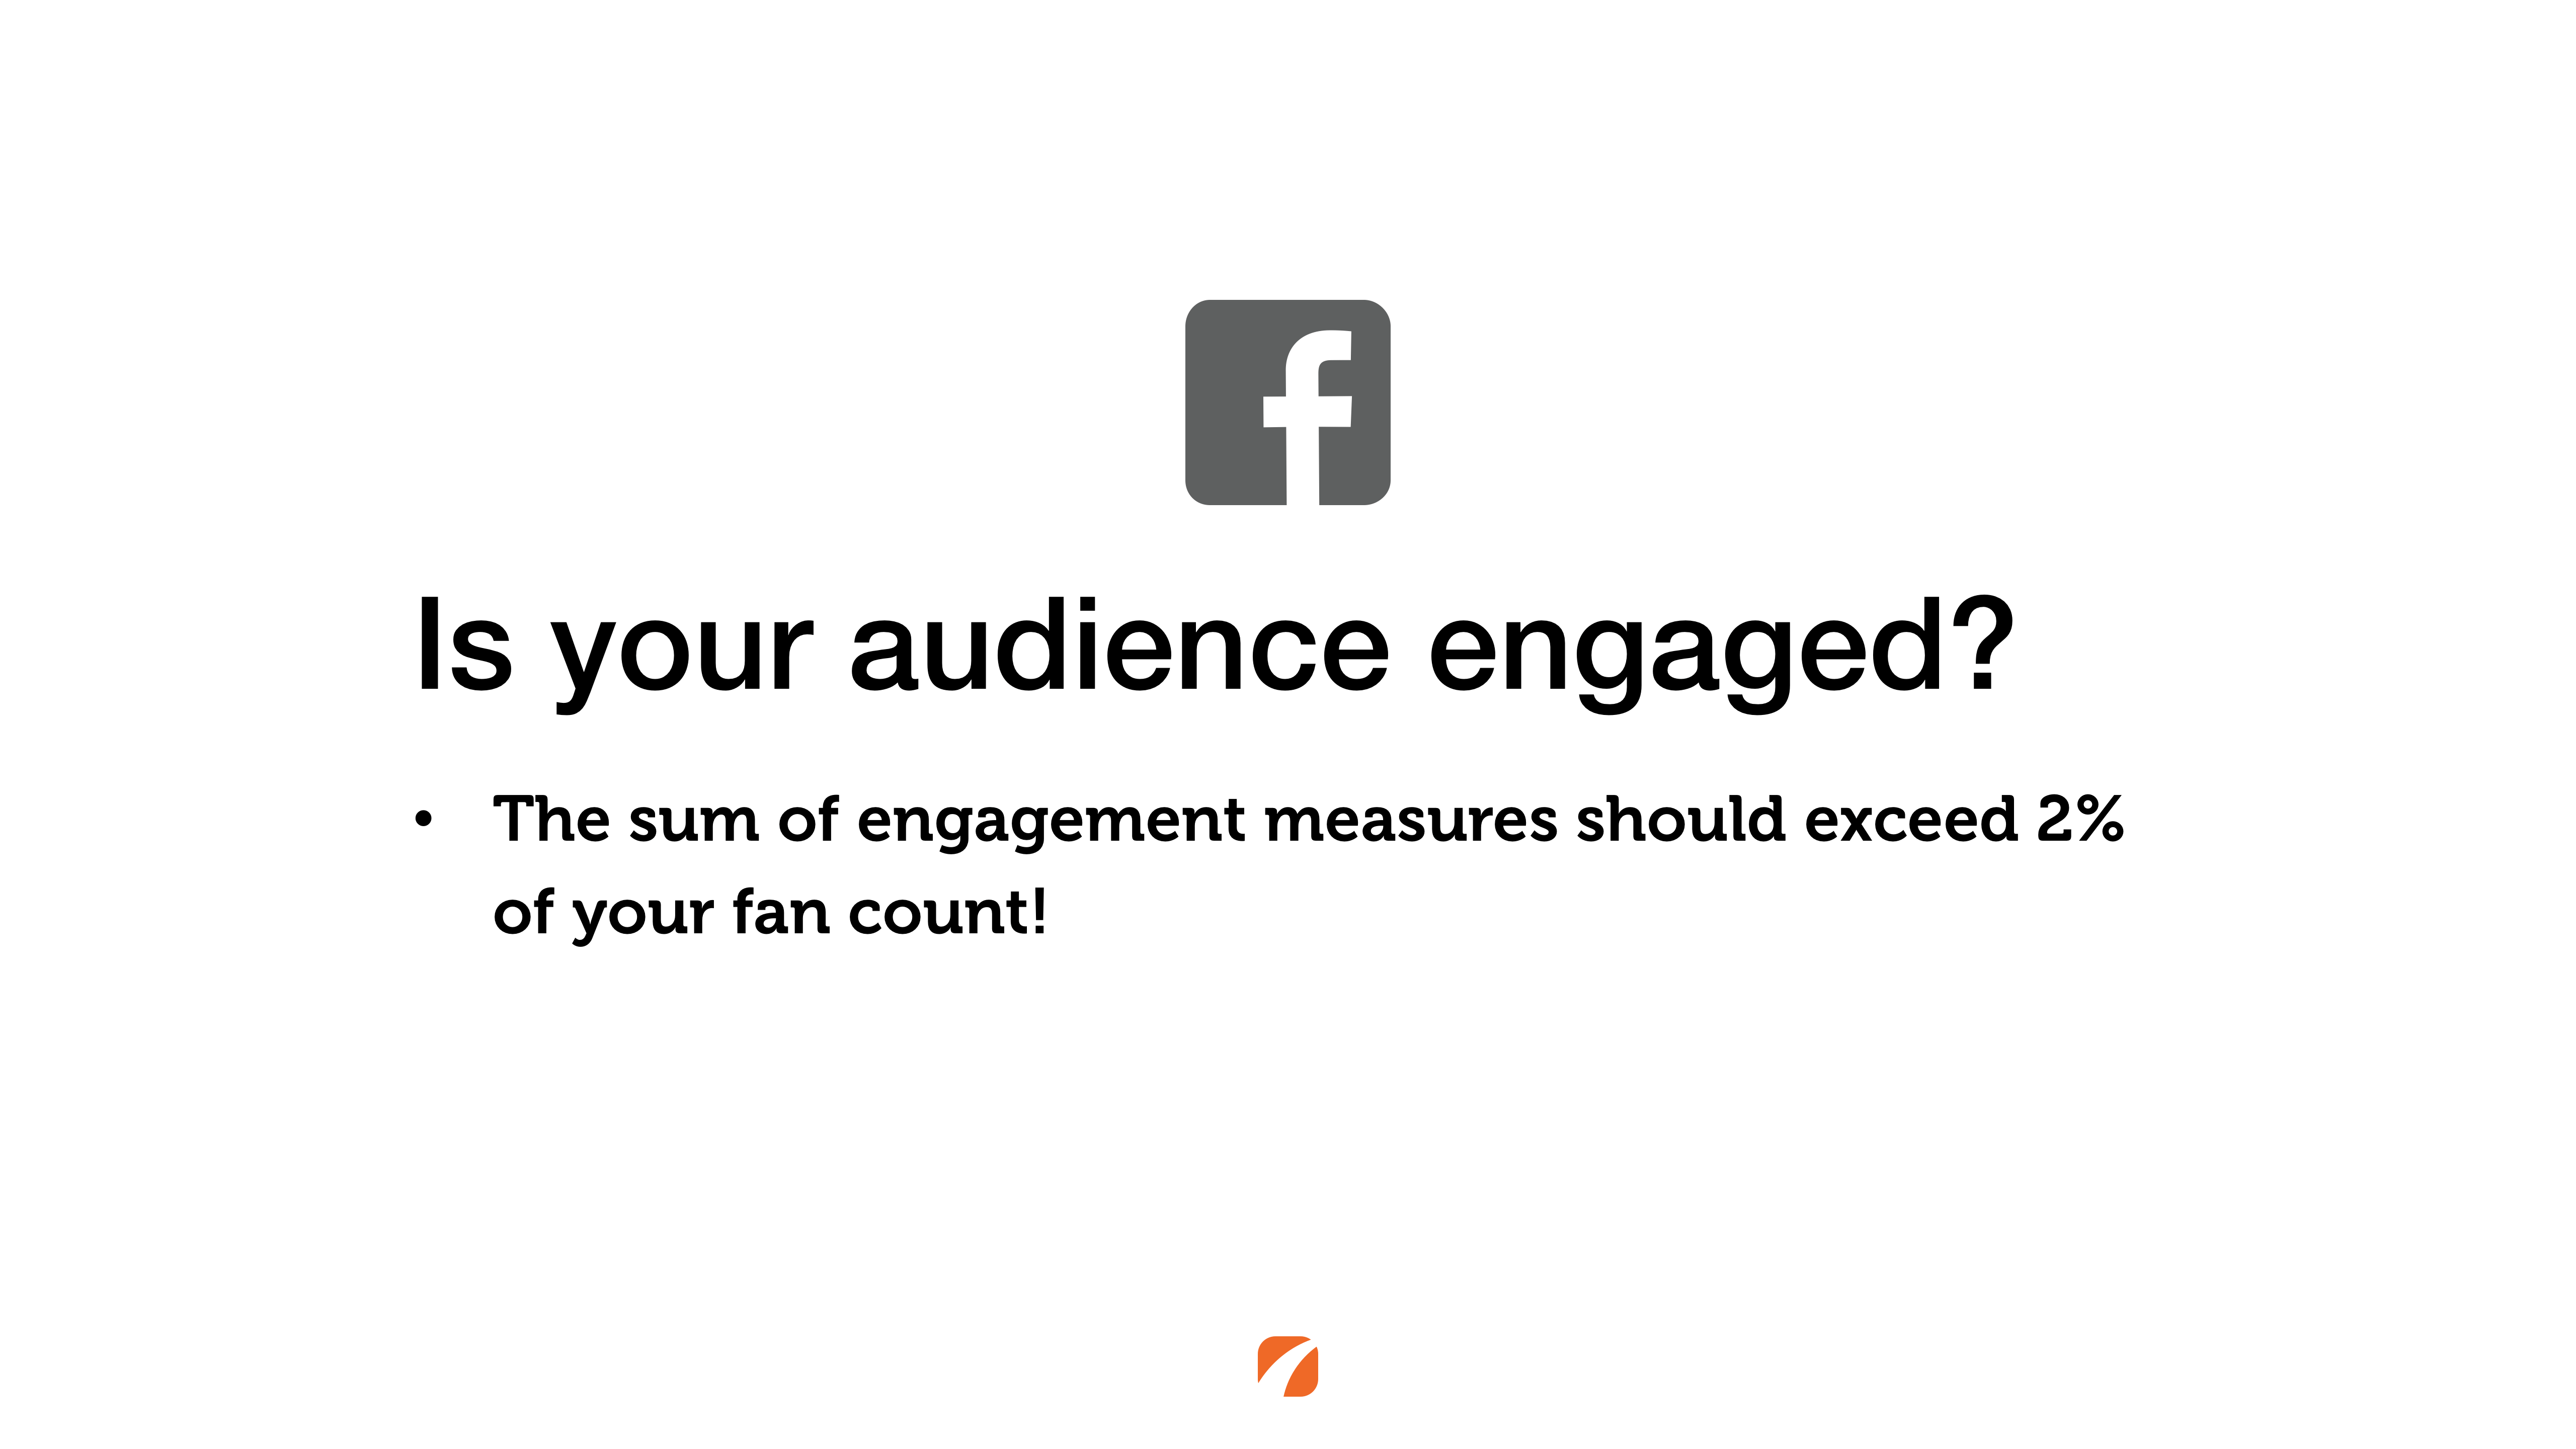 Is your audience engaged? The sum of engagement measures should exceed 2% of your fan count!